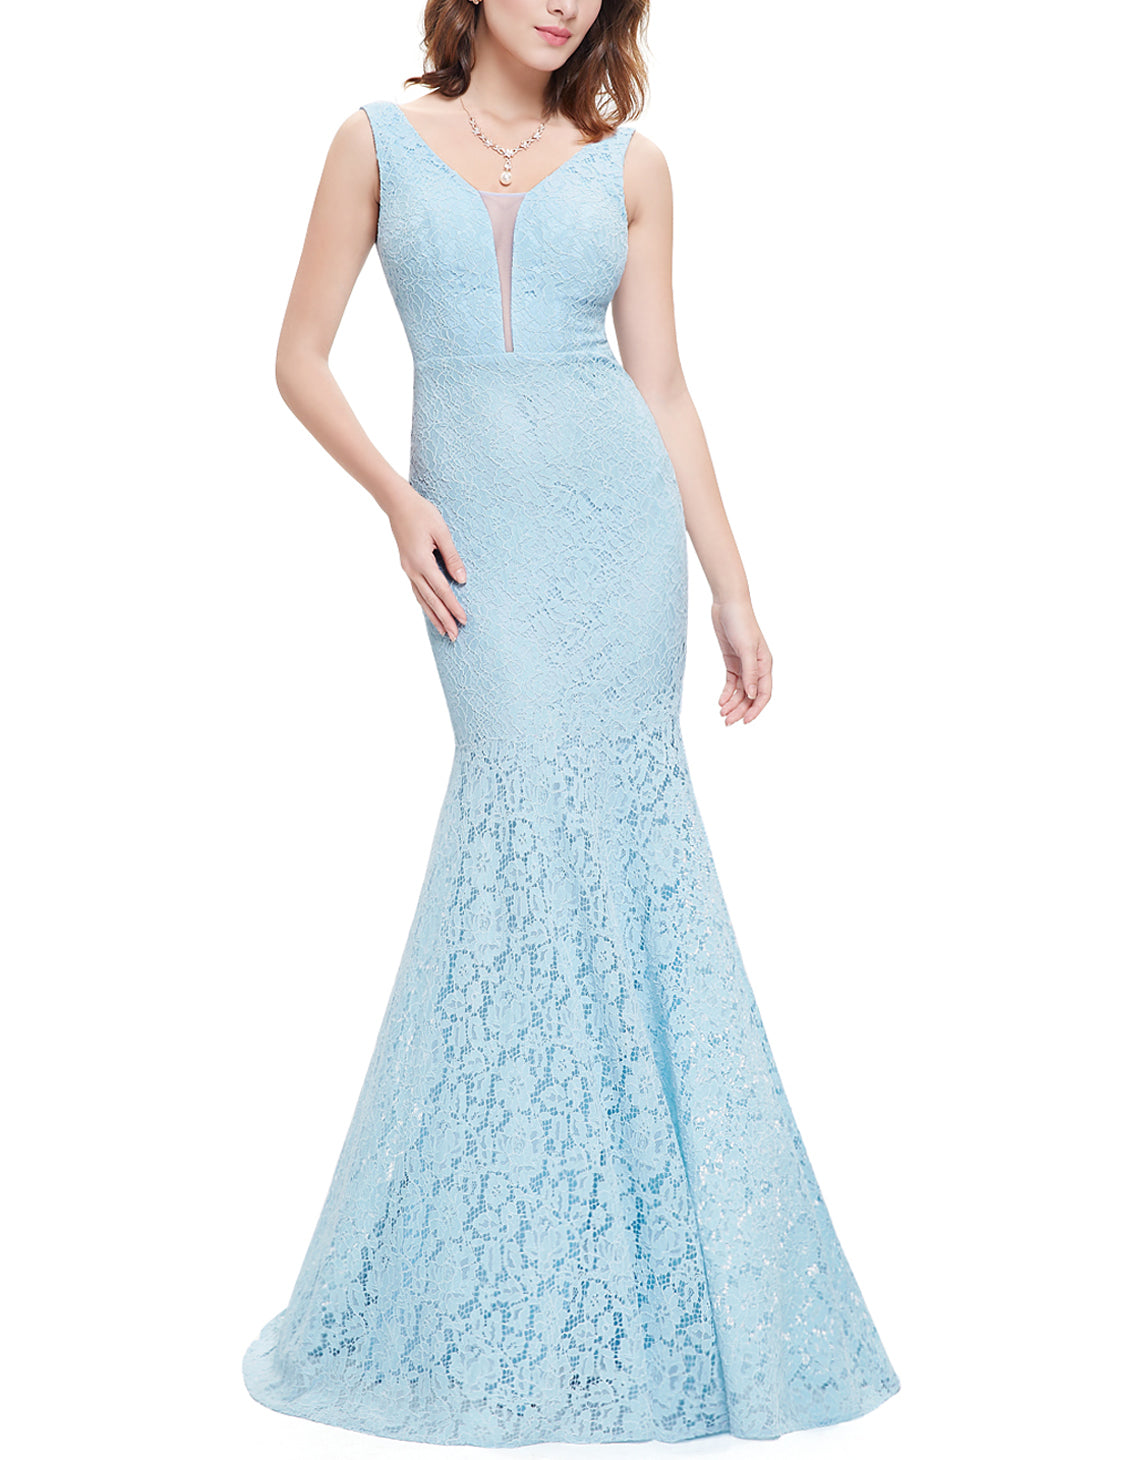 Sexy V-neck Fitted Lace Mermaid Long Fishtail Wholesale Evening Dress